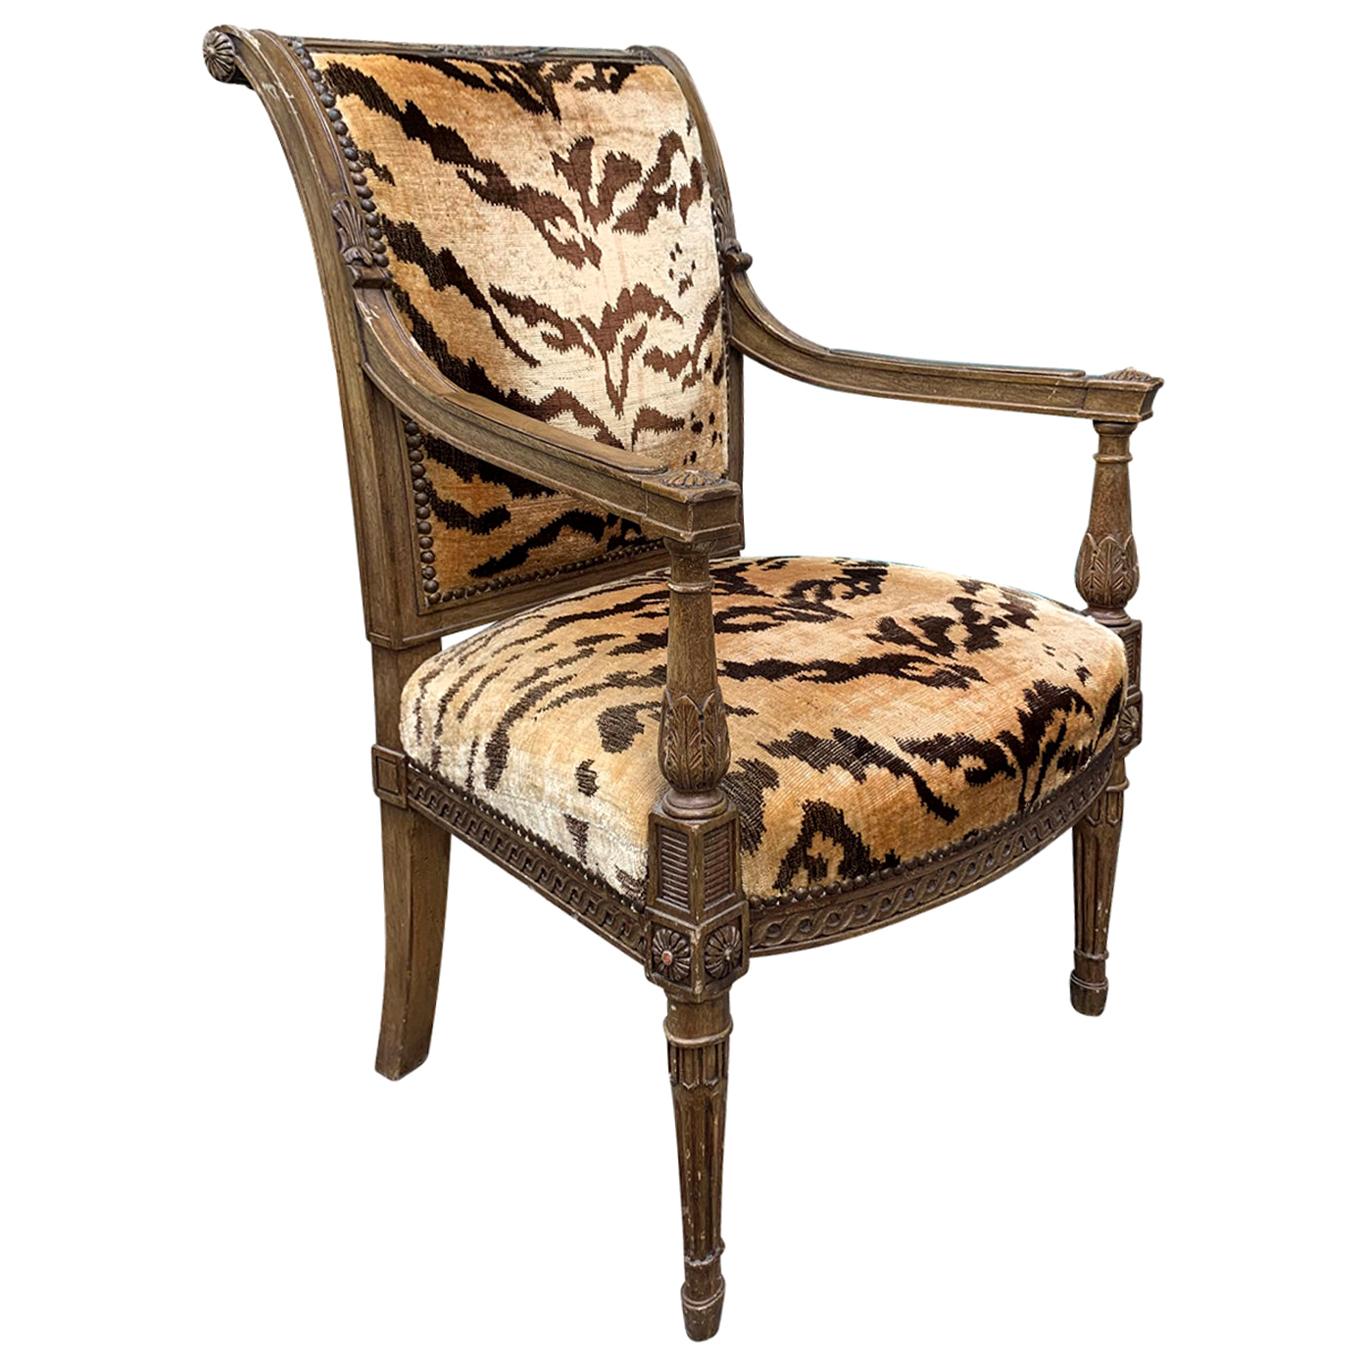 20th Century Yale Burge Directoire Style Carved Armchair with Tiger Upholstery